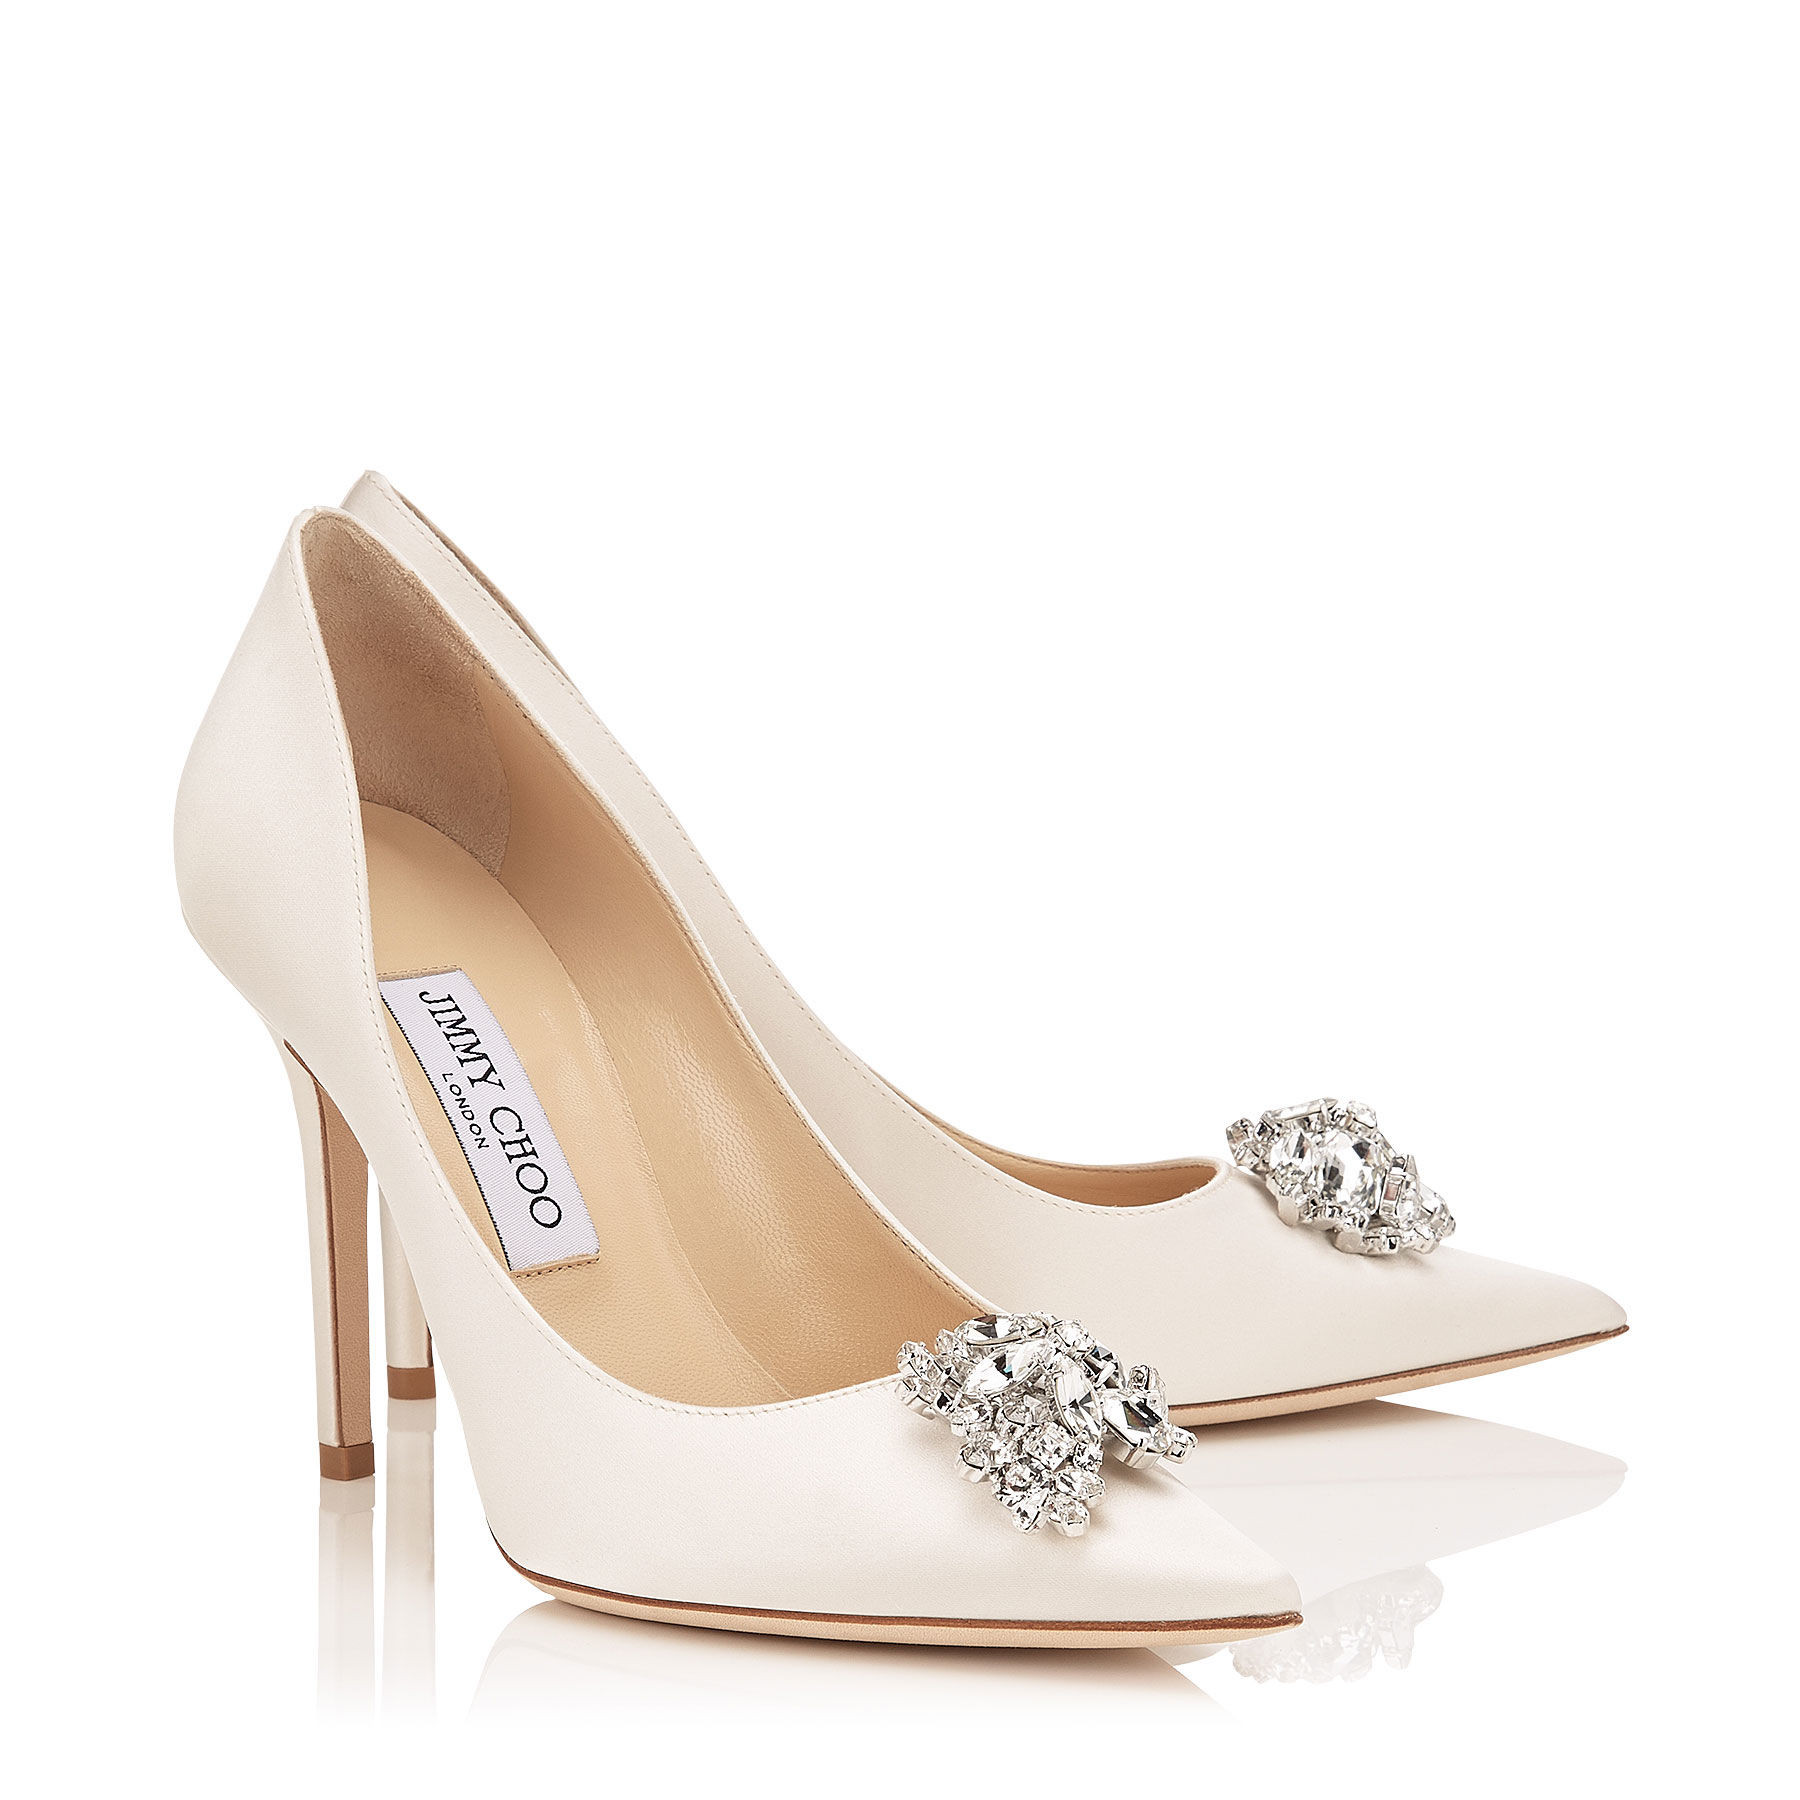 Wedding Shoes Jimmy Choo
 20 Aisle Perfect Wedding Shoes fit for a Queen Aisle Perfect